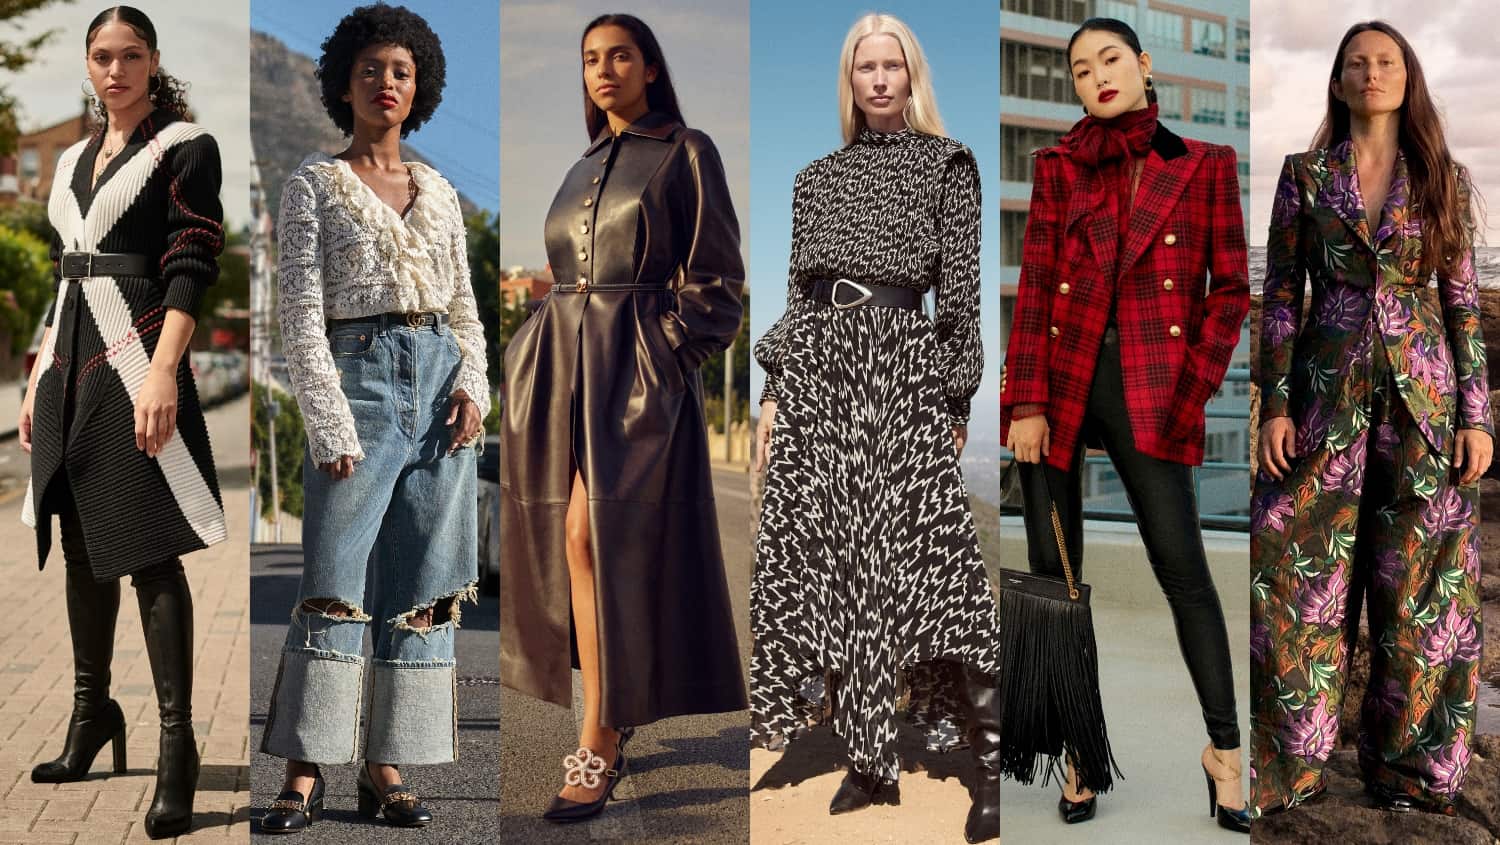 Net-a-Porter's Fall Campaign Shows Real Women's Style in Different Cities